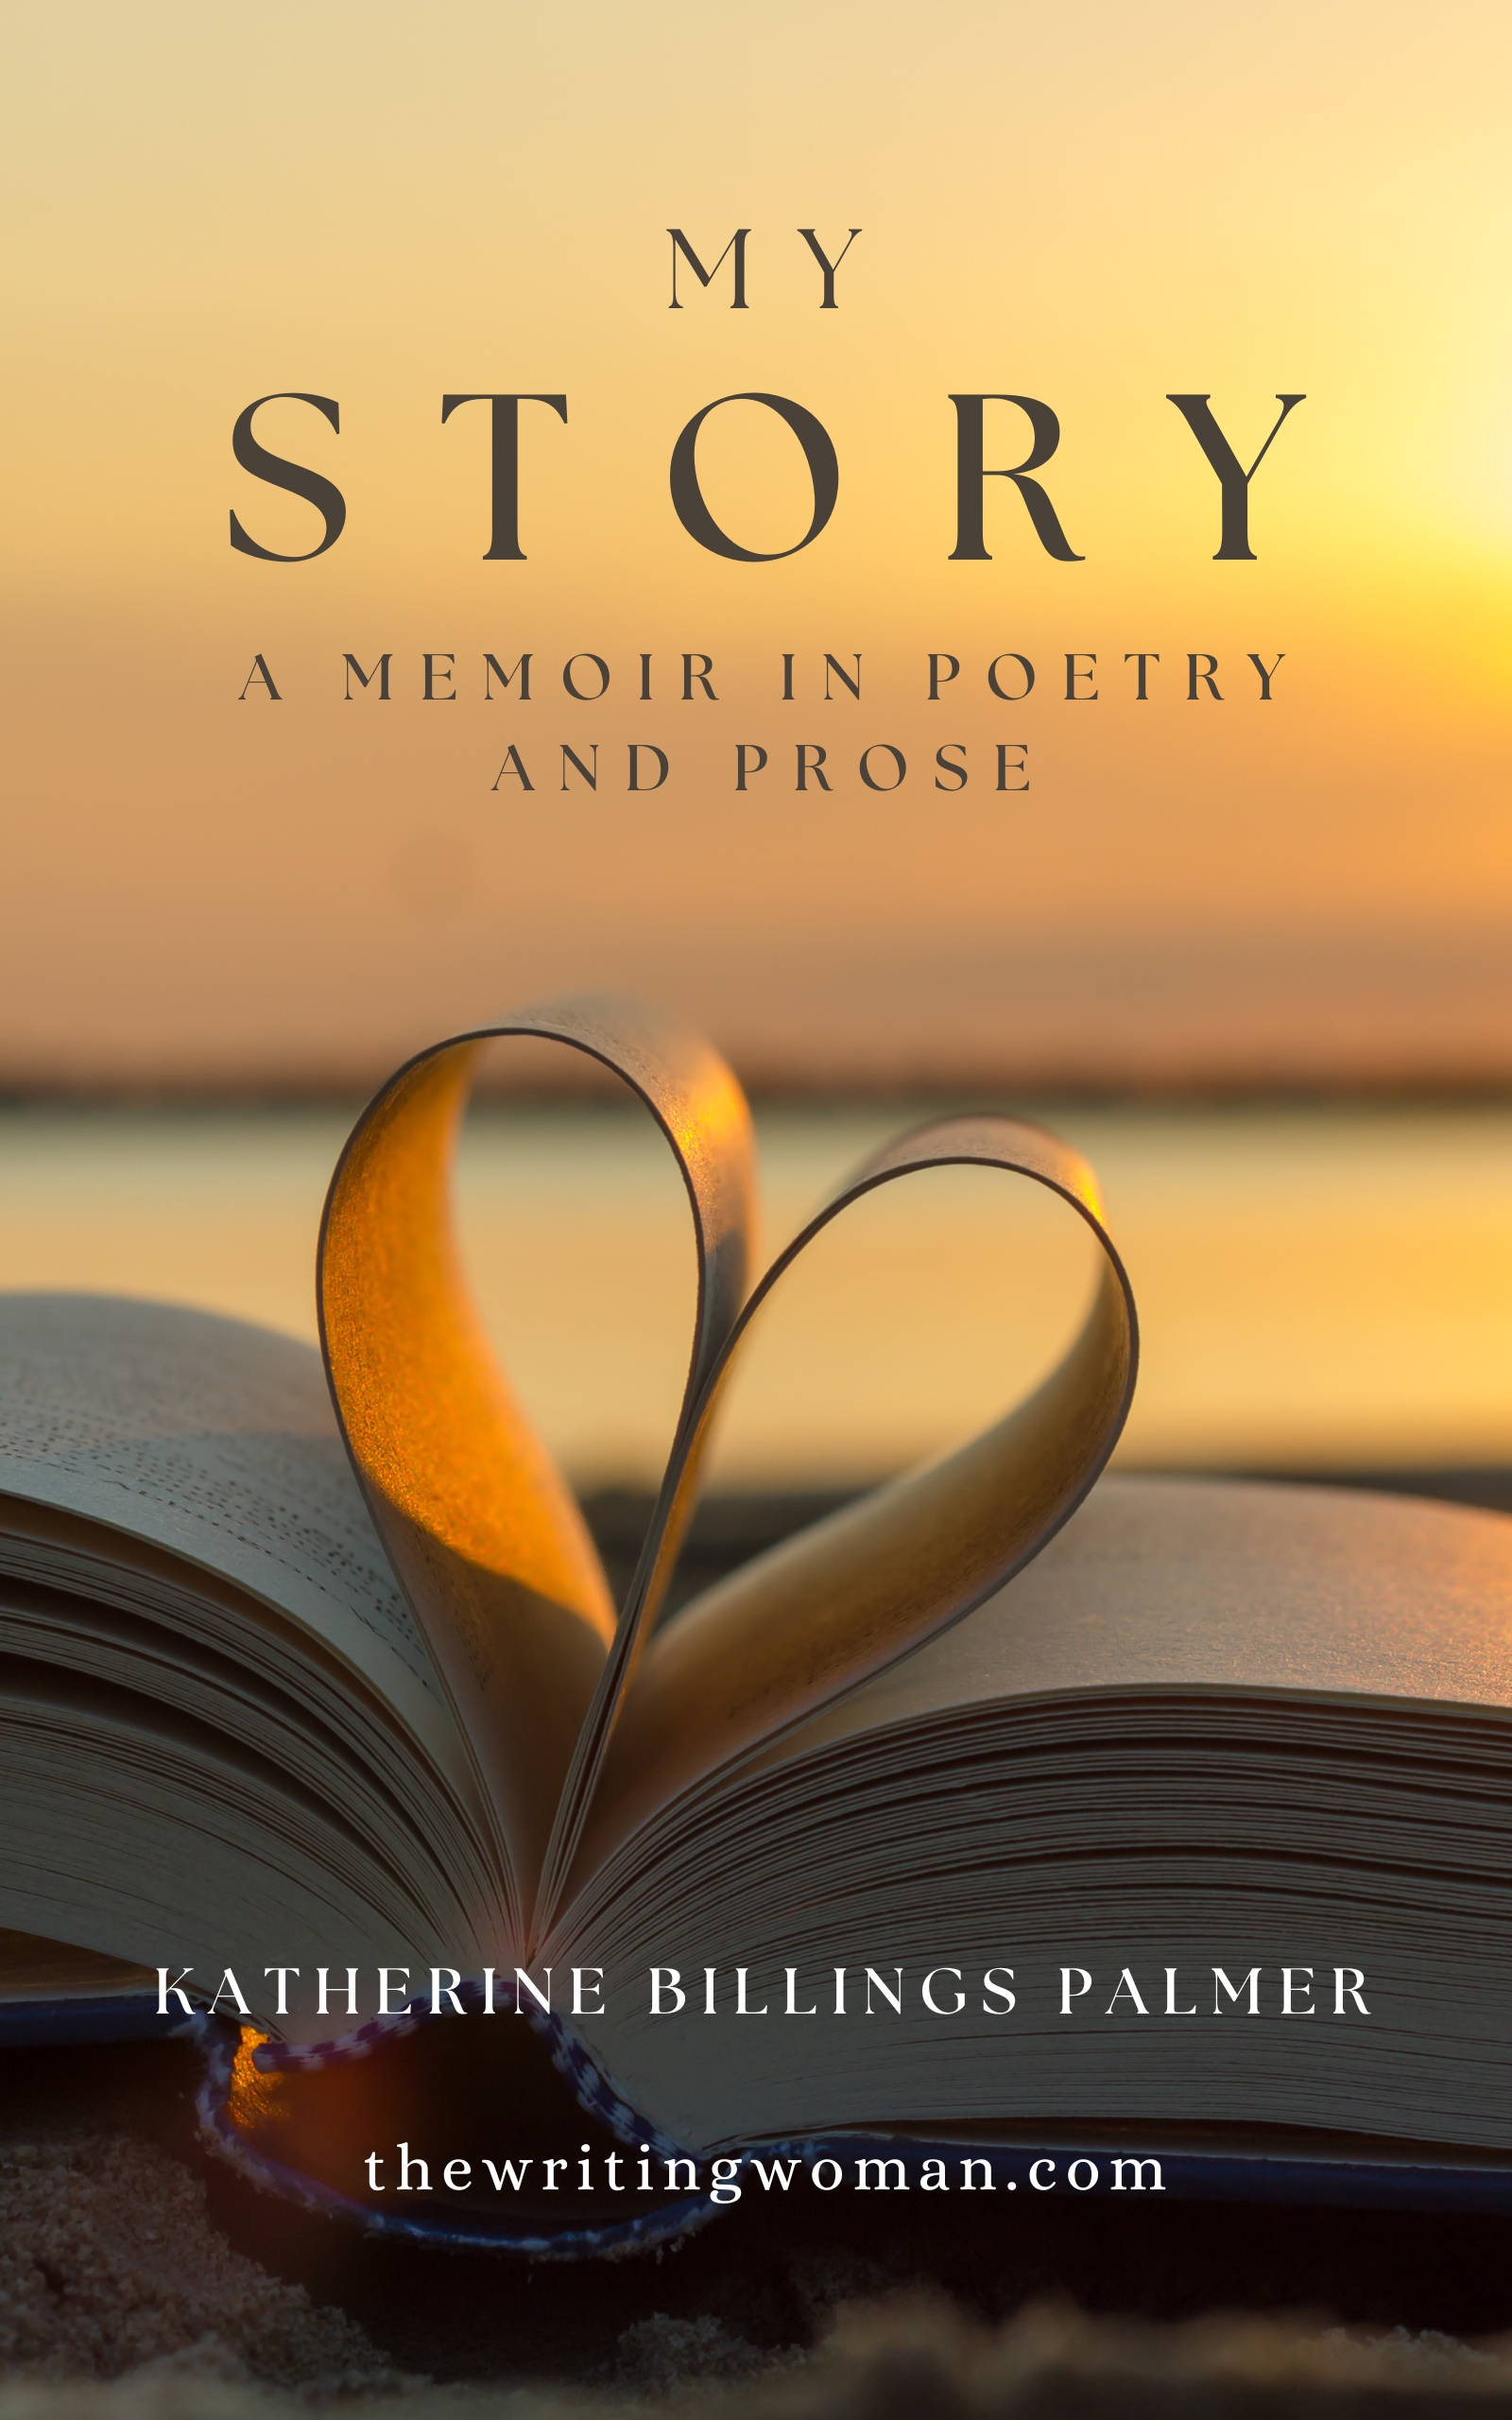 My Story: A Memoir in Poetry and Prose now available on Amazon